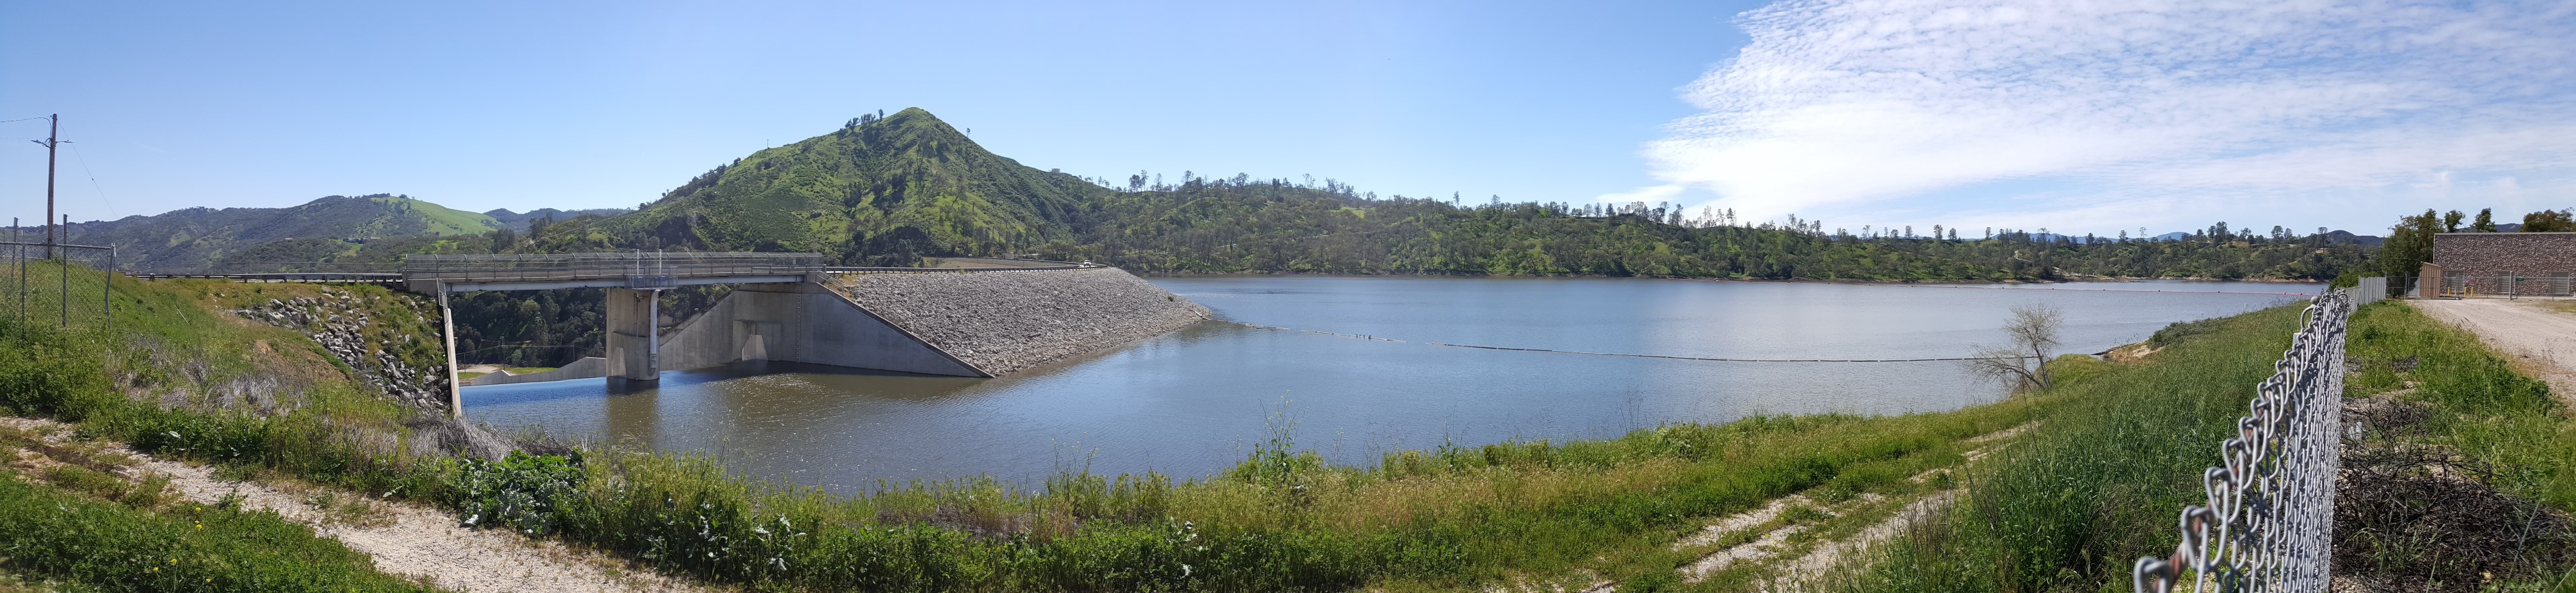 Lake Nacimiento  Click to view article, County to provide transportation assistance to residents isolated due to Chimney Rock road closure